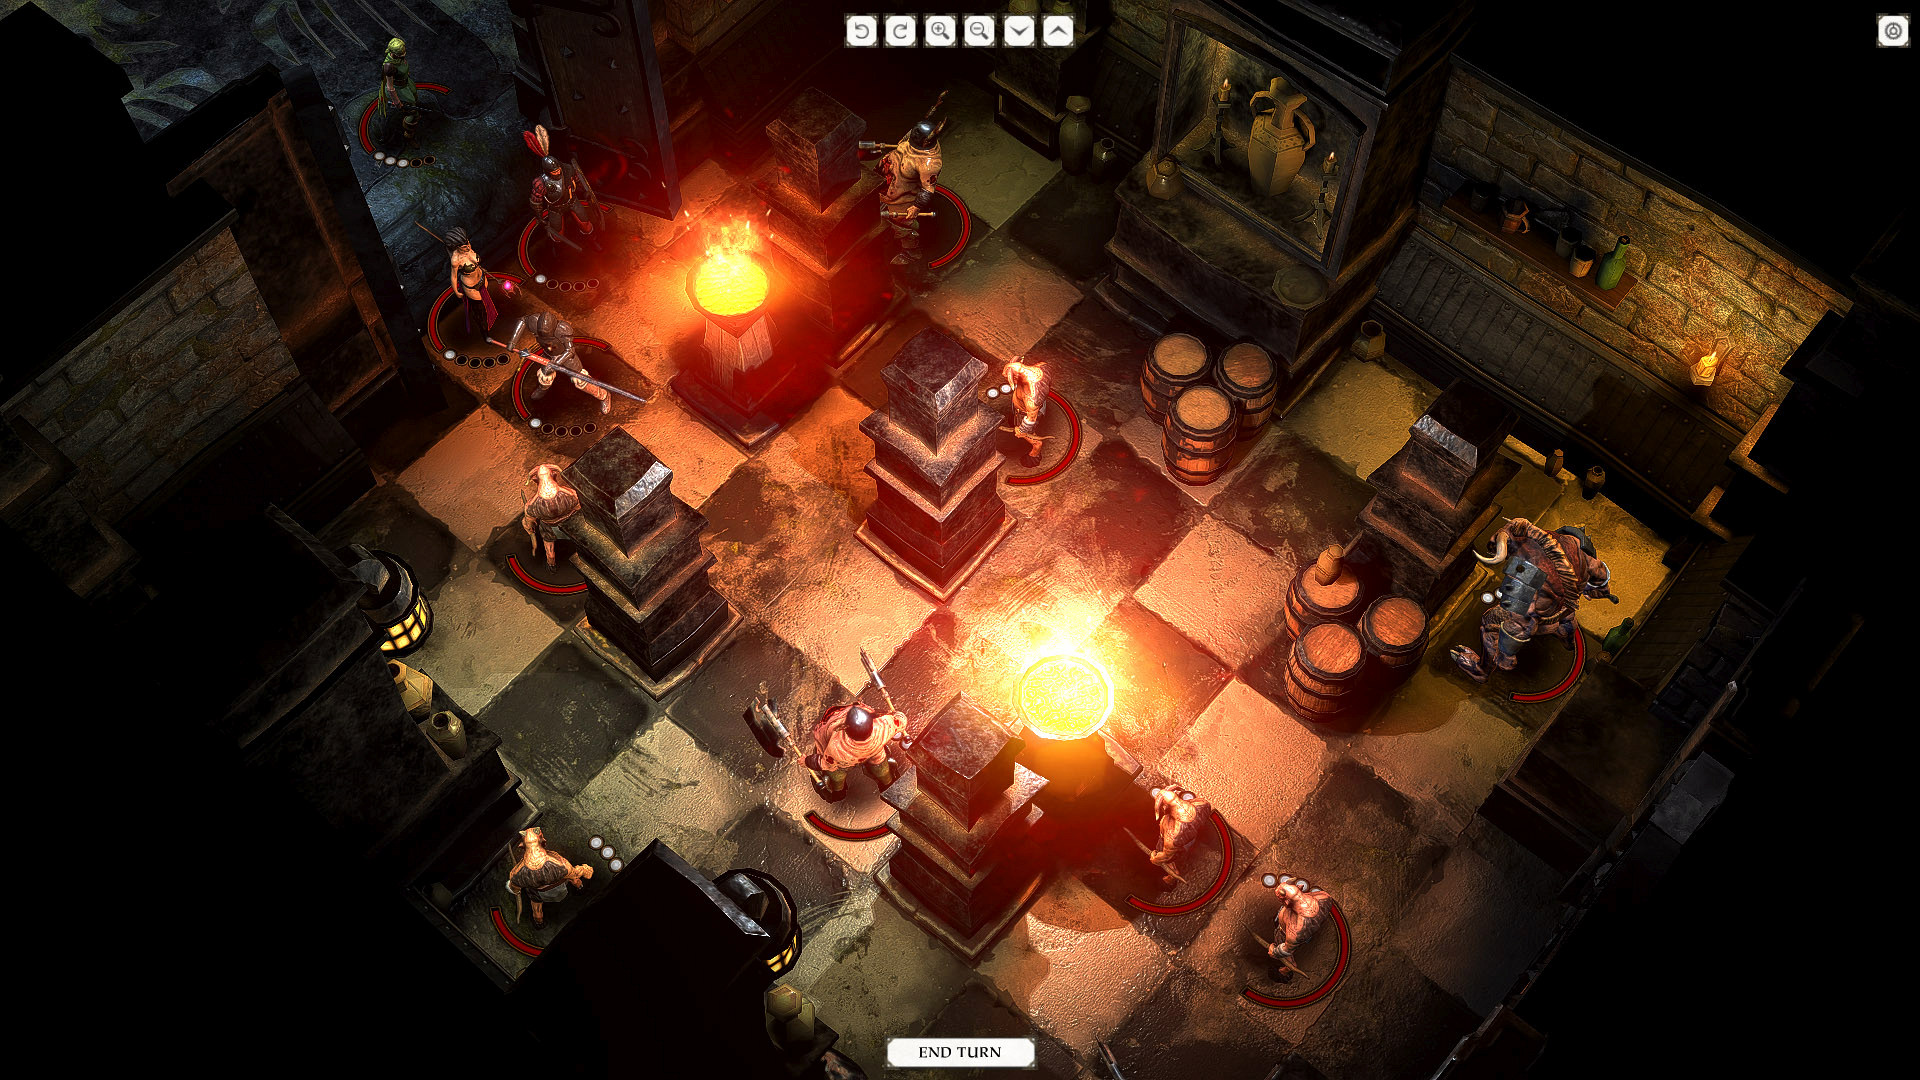 Warhammer quest 2. Warhammer Quest 2: the end times. Warhammer Quest 2 the end times игра. Warhammer Quest 2 the end times by xatab. Quest 2 не работает.